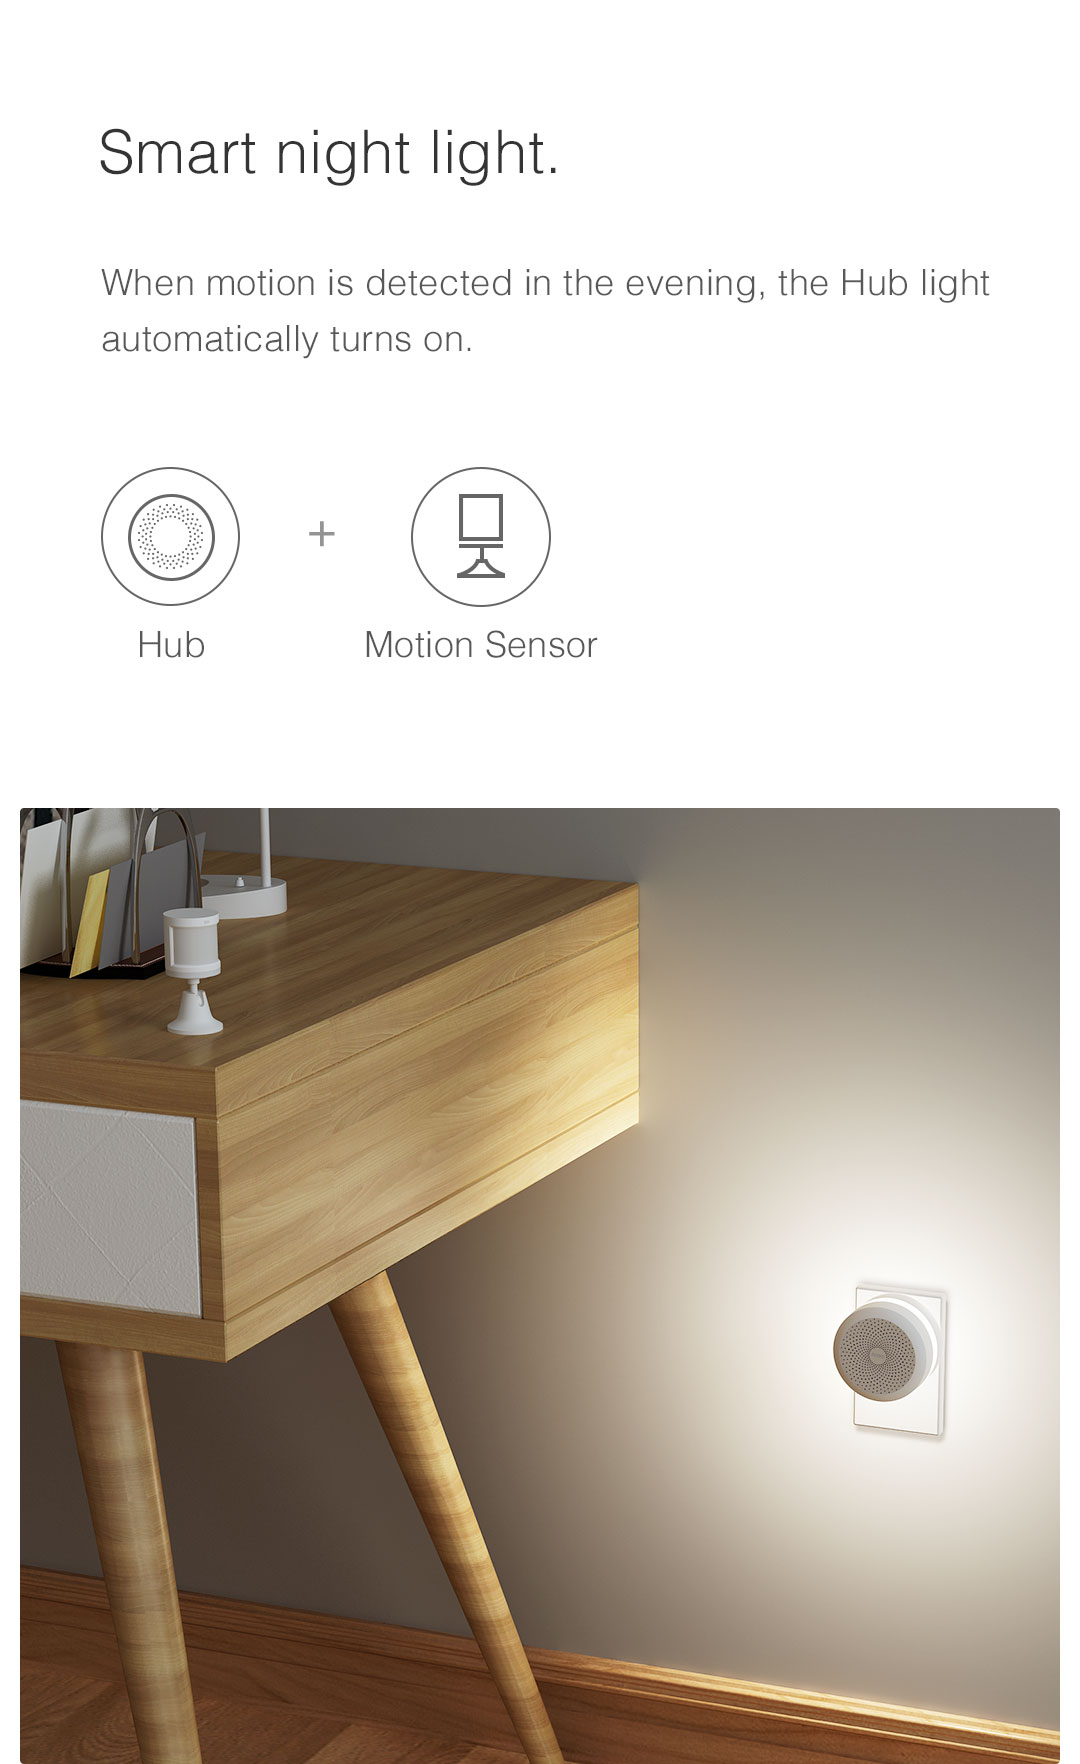 When Aqara body motion sensor is triggered at night, the Hub light automatically turns on.